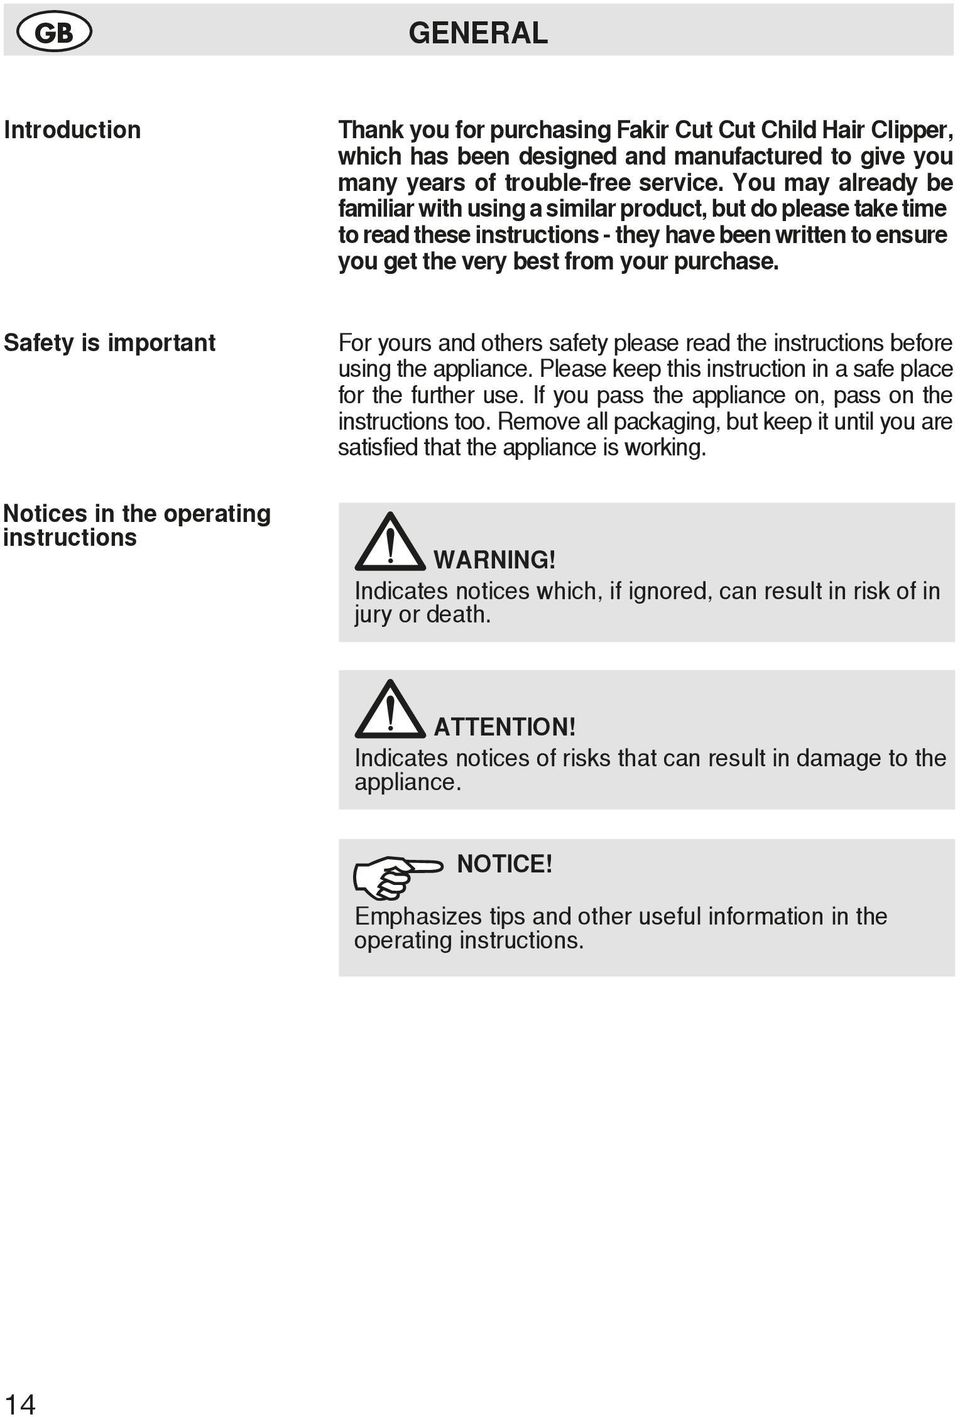 Safety is important Notices in the operating instructions For yours and others safety please read the instructions before using the appliance.